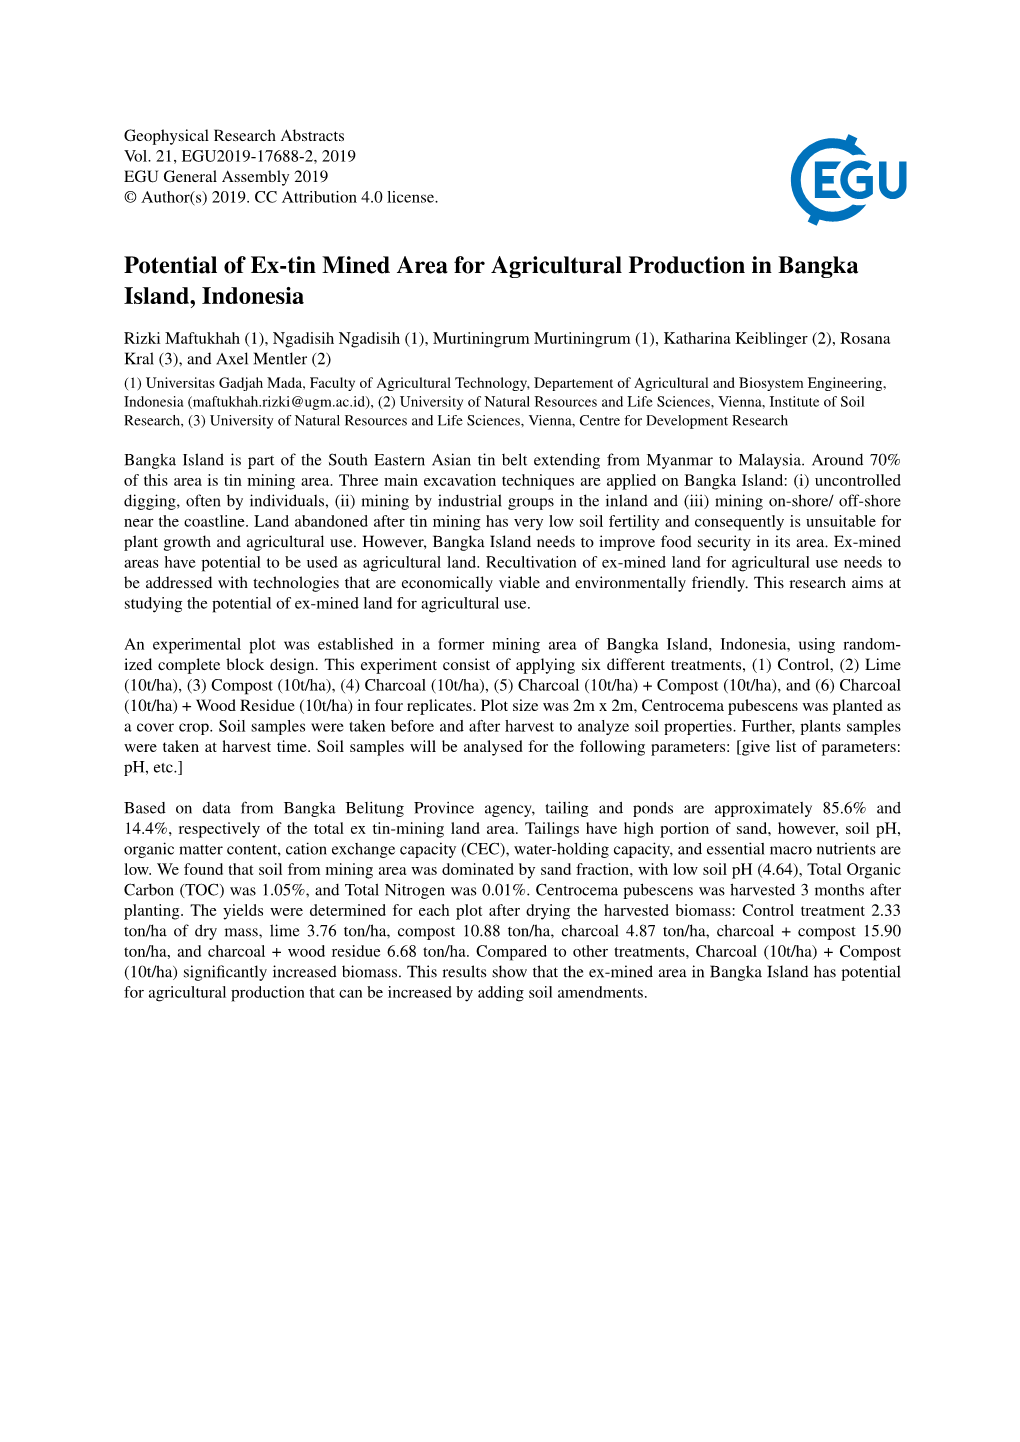 Potential of Ex-Tin Mined Area for Agricultural Production in Bangka Island, Indonesia